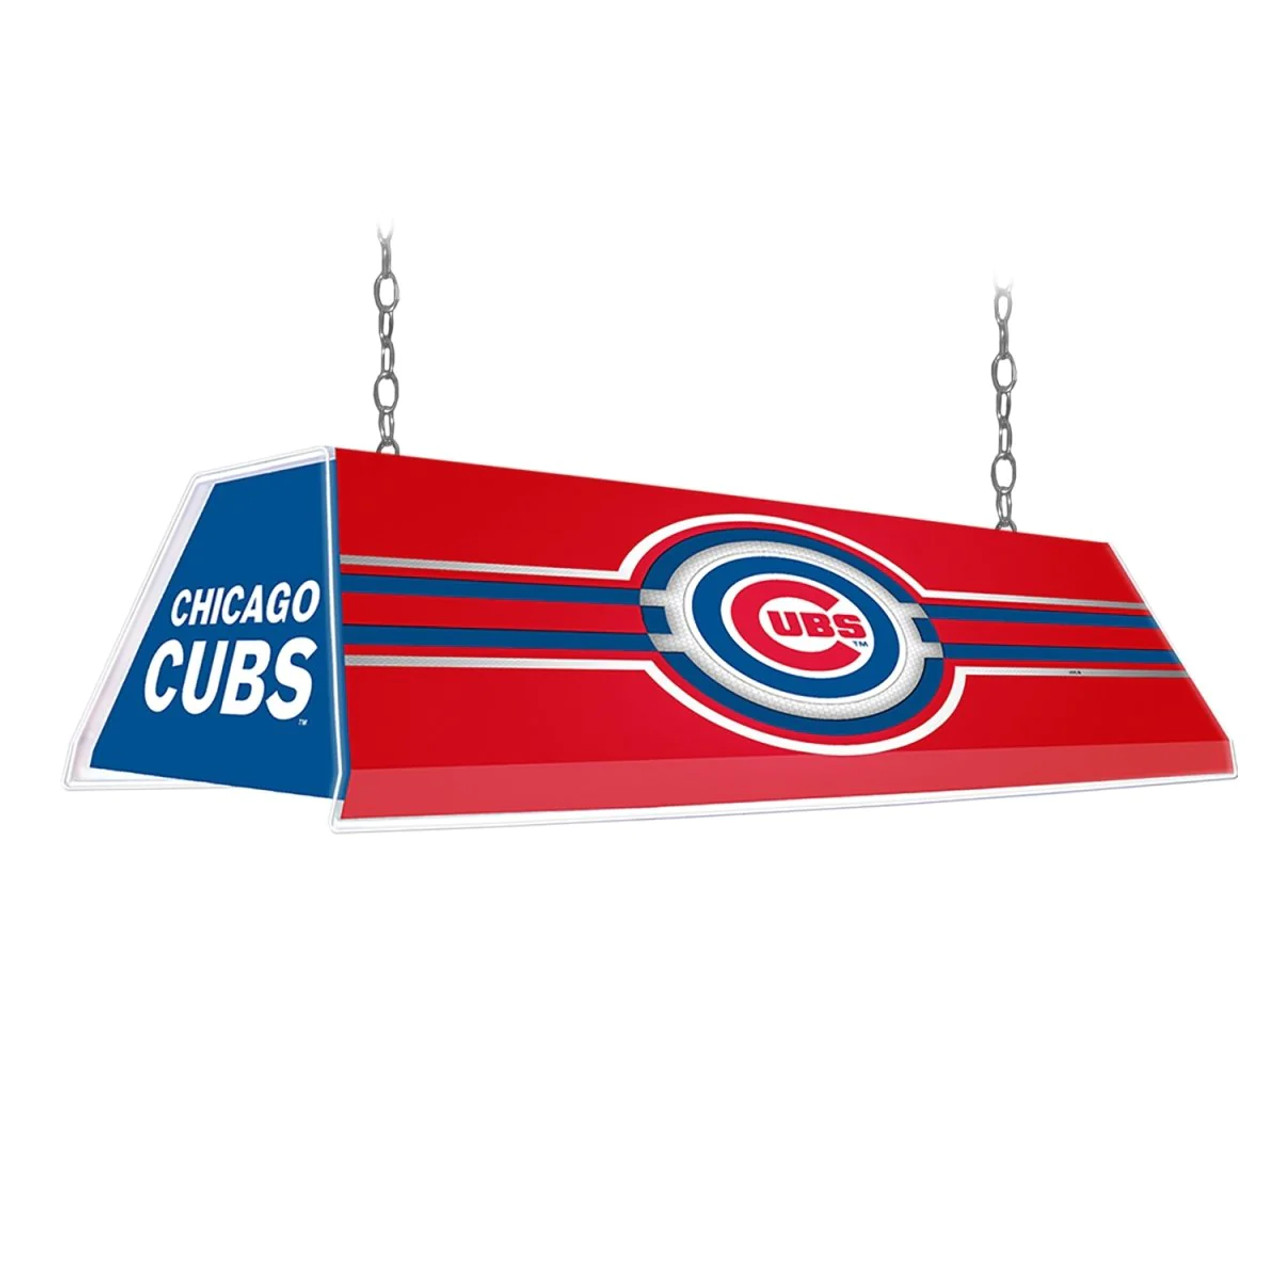 MBCUBS-320-01B, Chicago, CHI, Cubs, Cubbies, Edge Glow, Billiard, Pool, Table, Light, "B" Version, MLB, The Fan-Brand, 704384966968